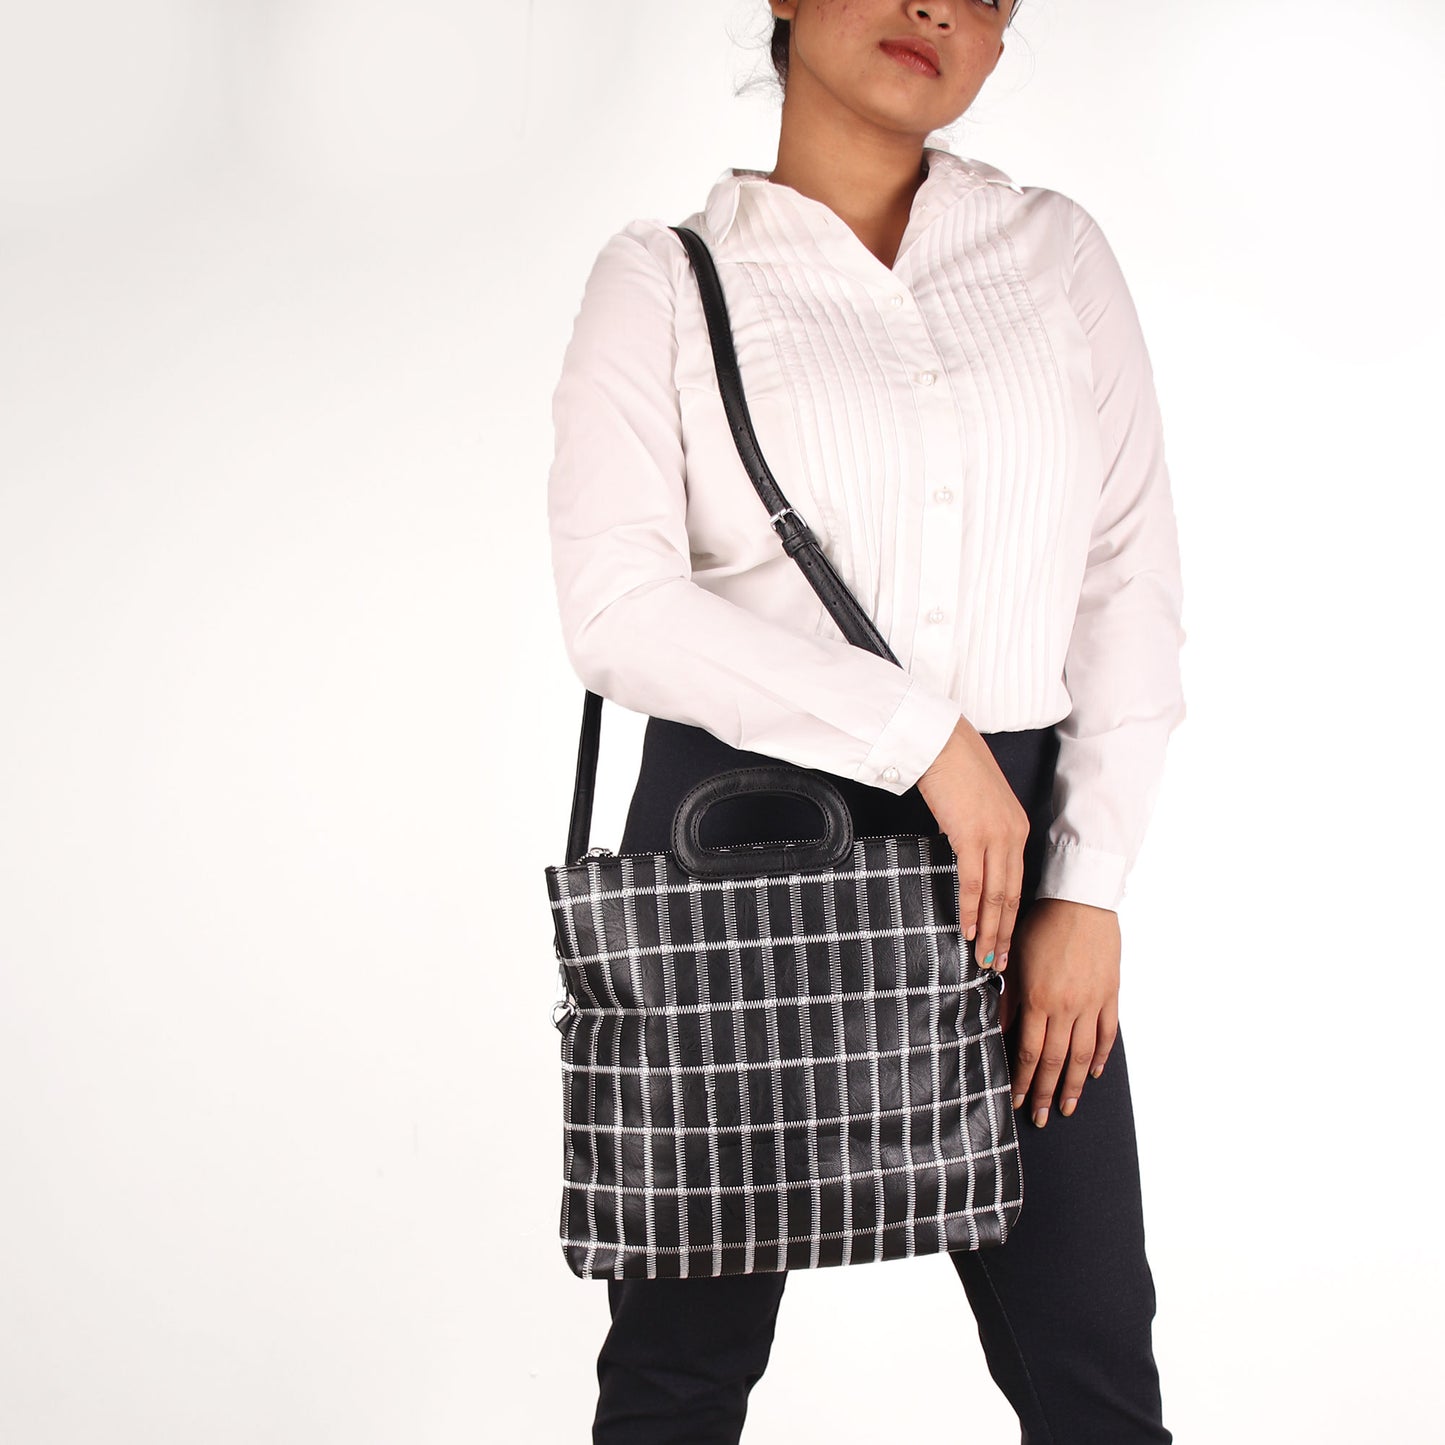 Sling Bag,The seamless Classical checkered Mix Bag in Black - Cippele Multi Store